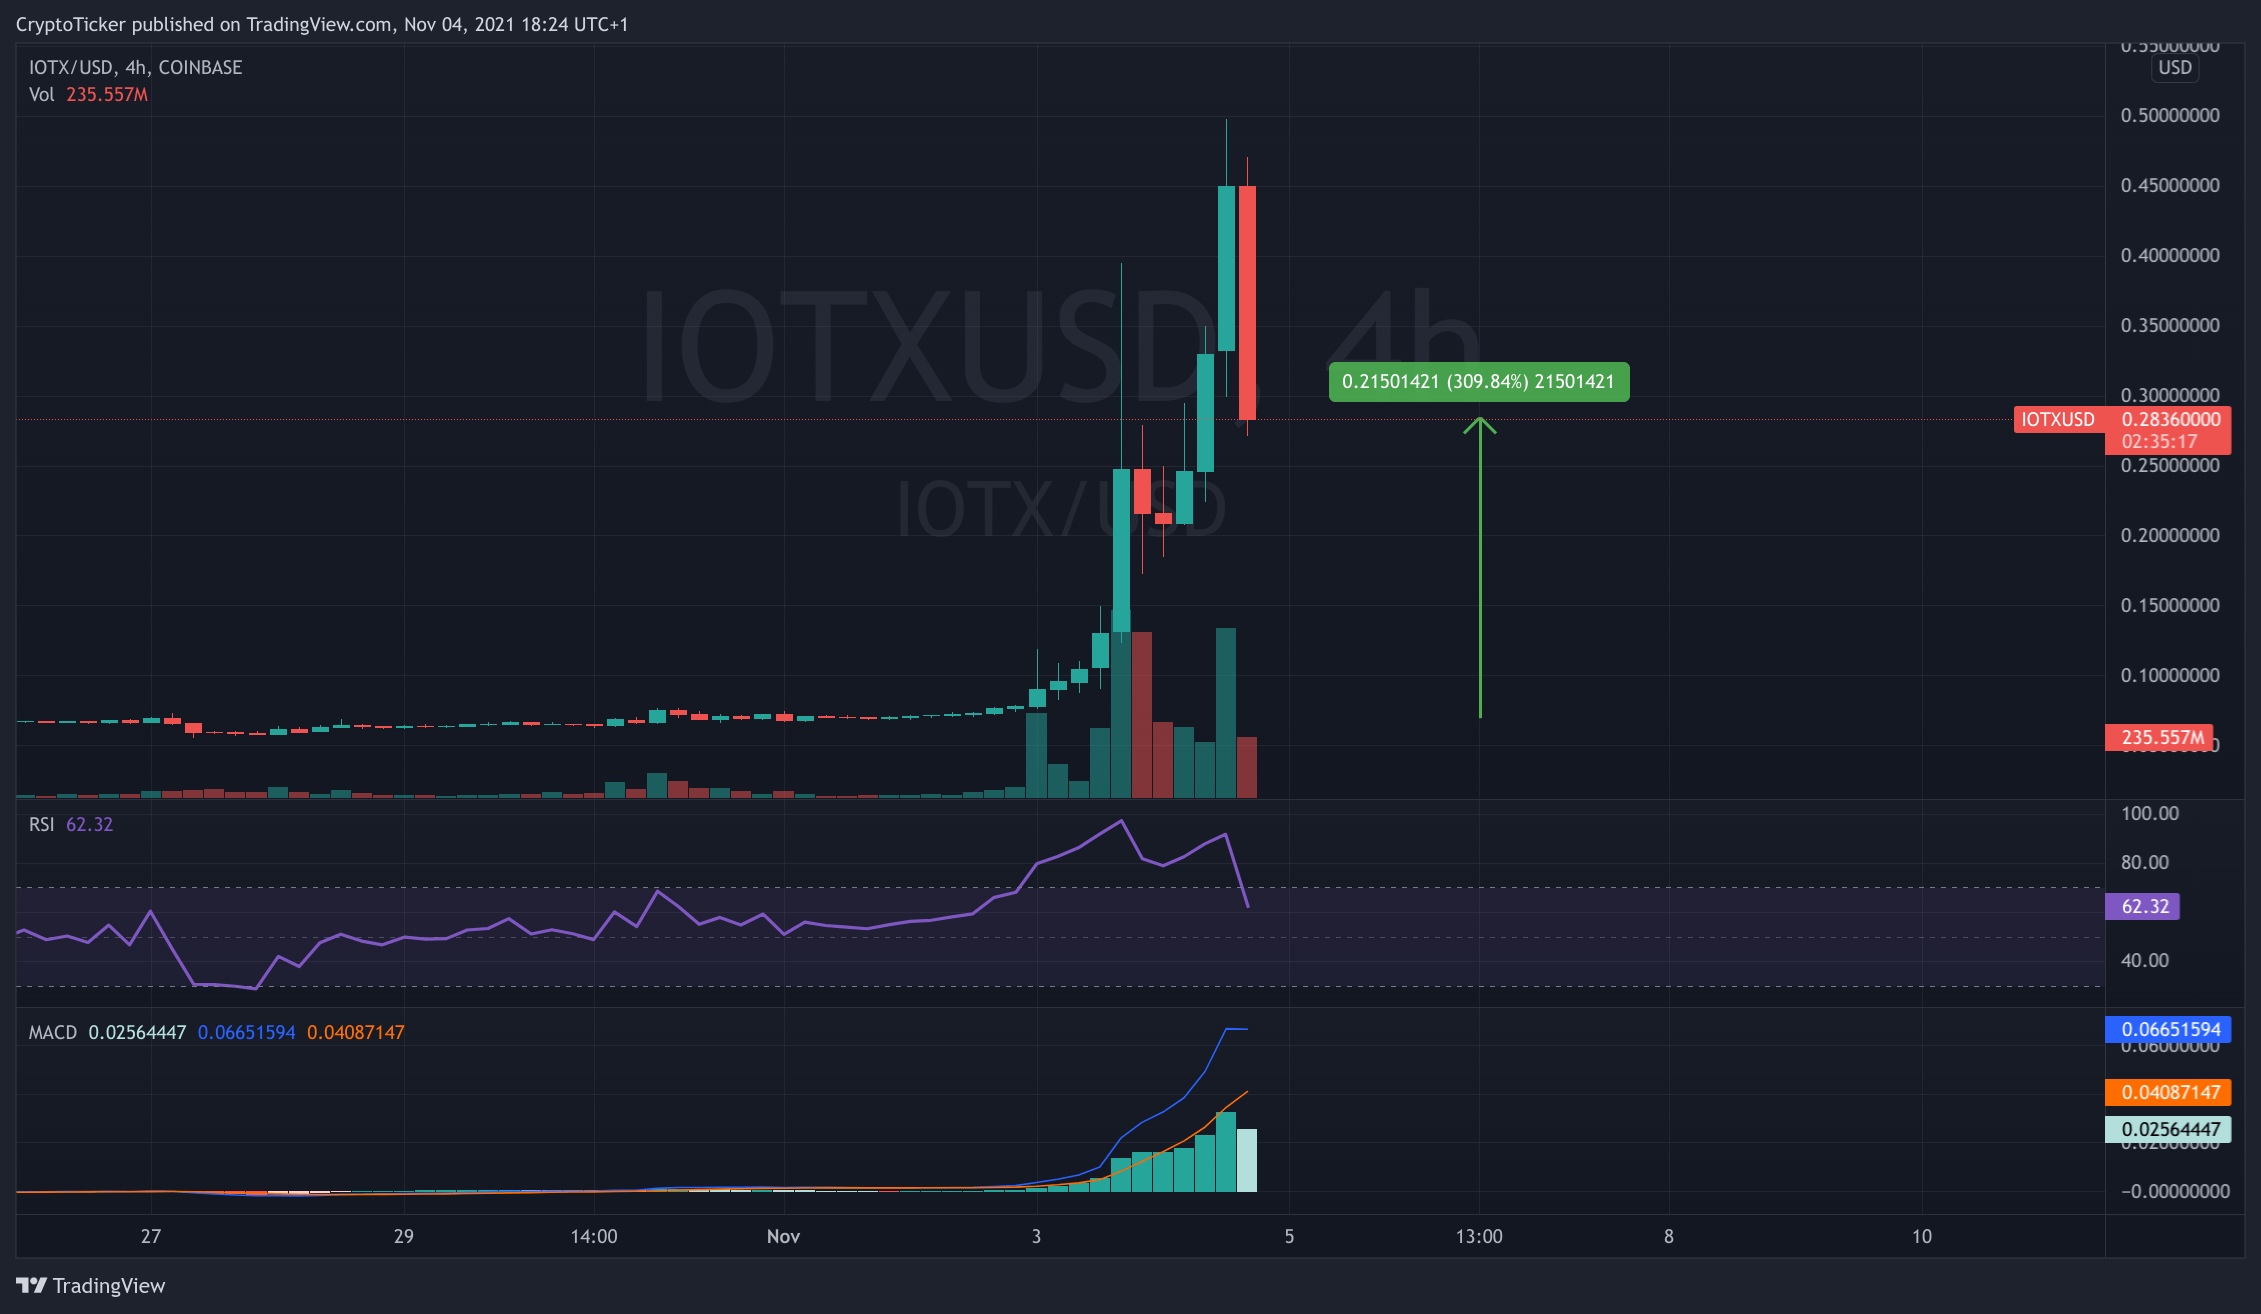 crypto up - IOTX/USD 4-hours chart showing IOTX's uptrend